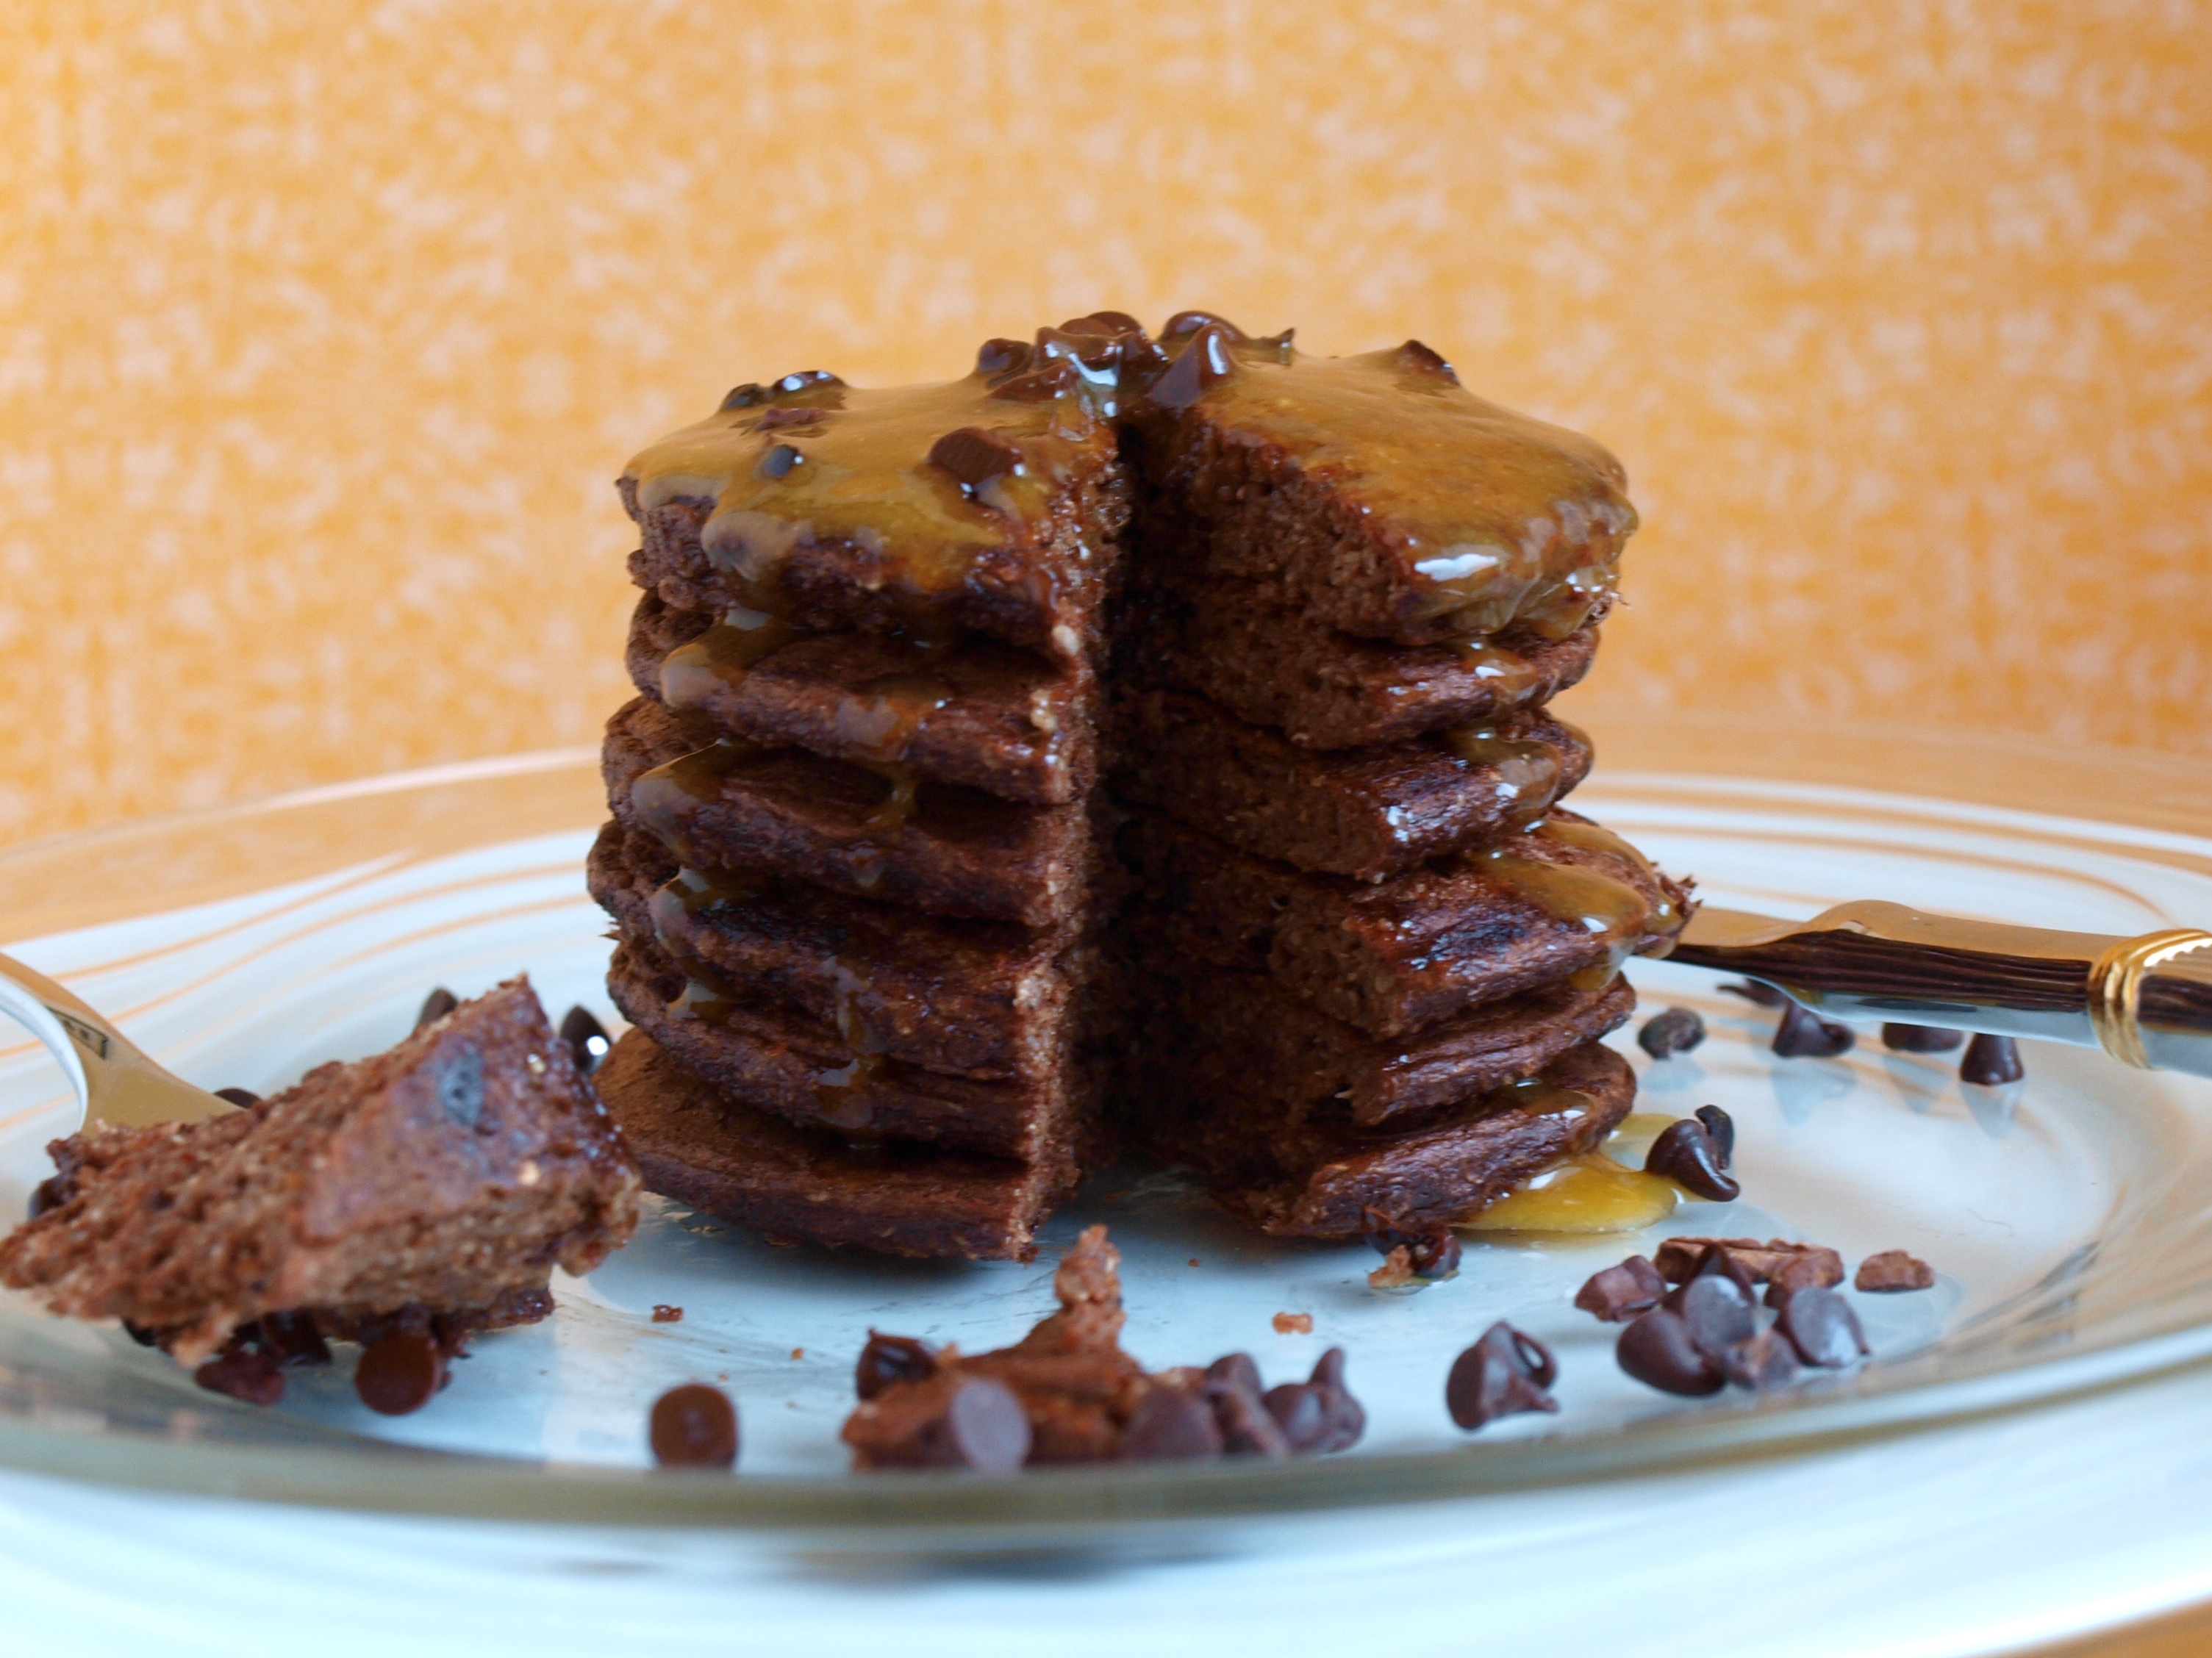 Chocolate Peanut Butter Pancakes with Syrup